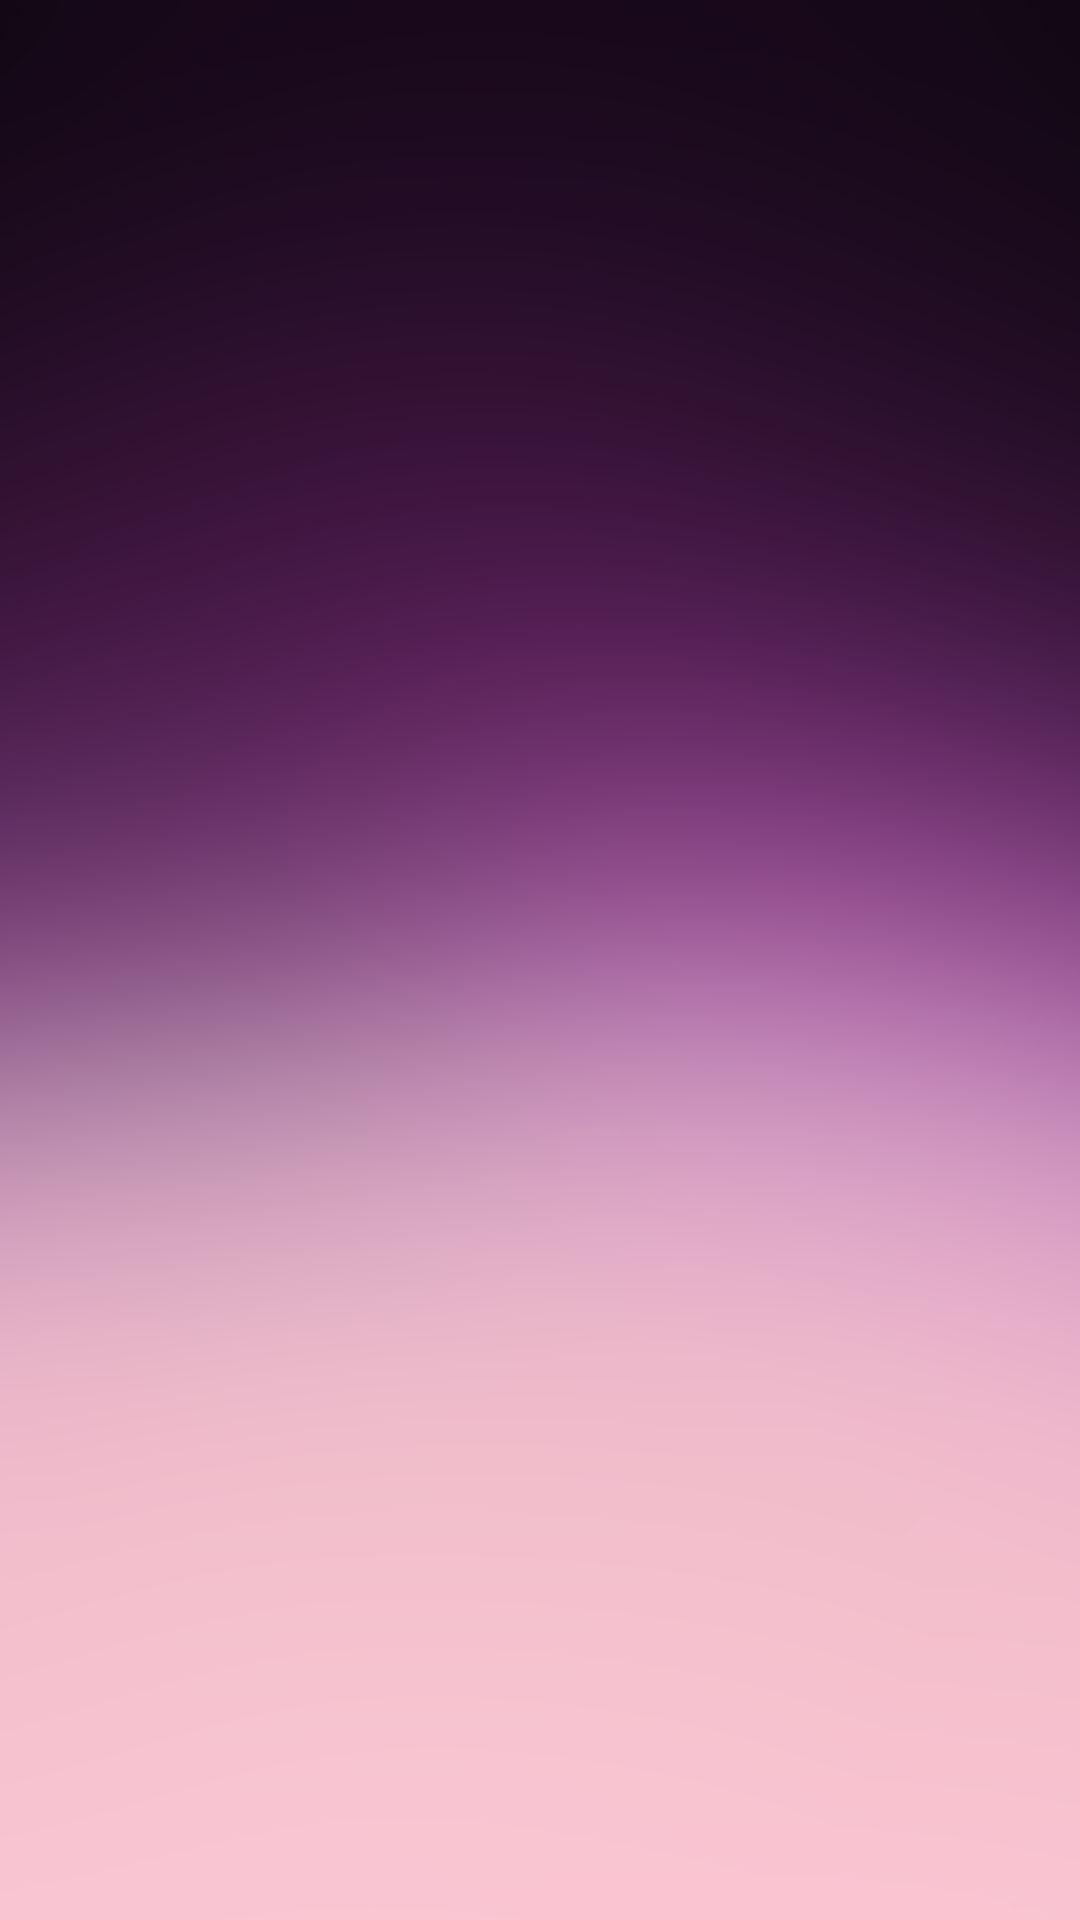 Purple Pink Gradient Simple Android Wallpaper free download